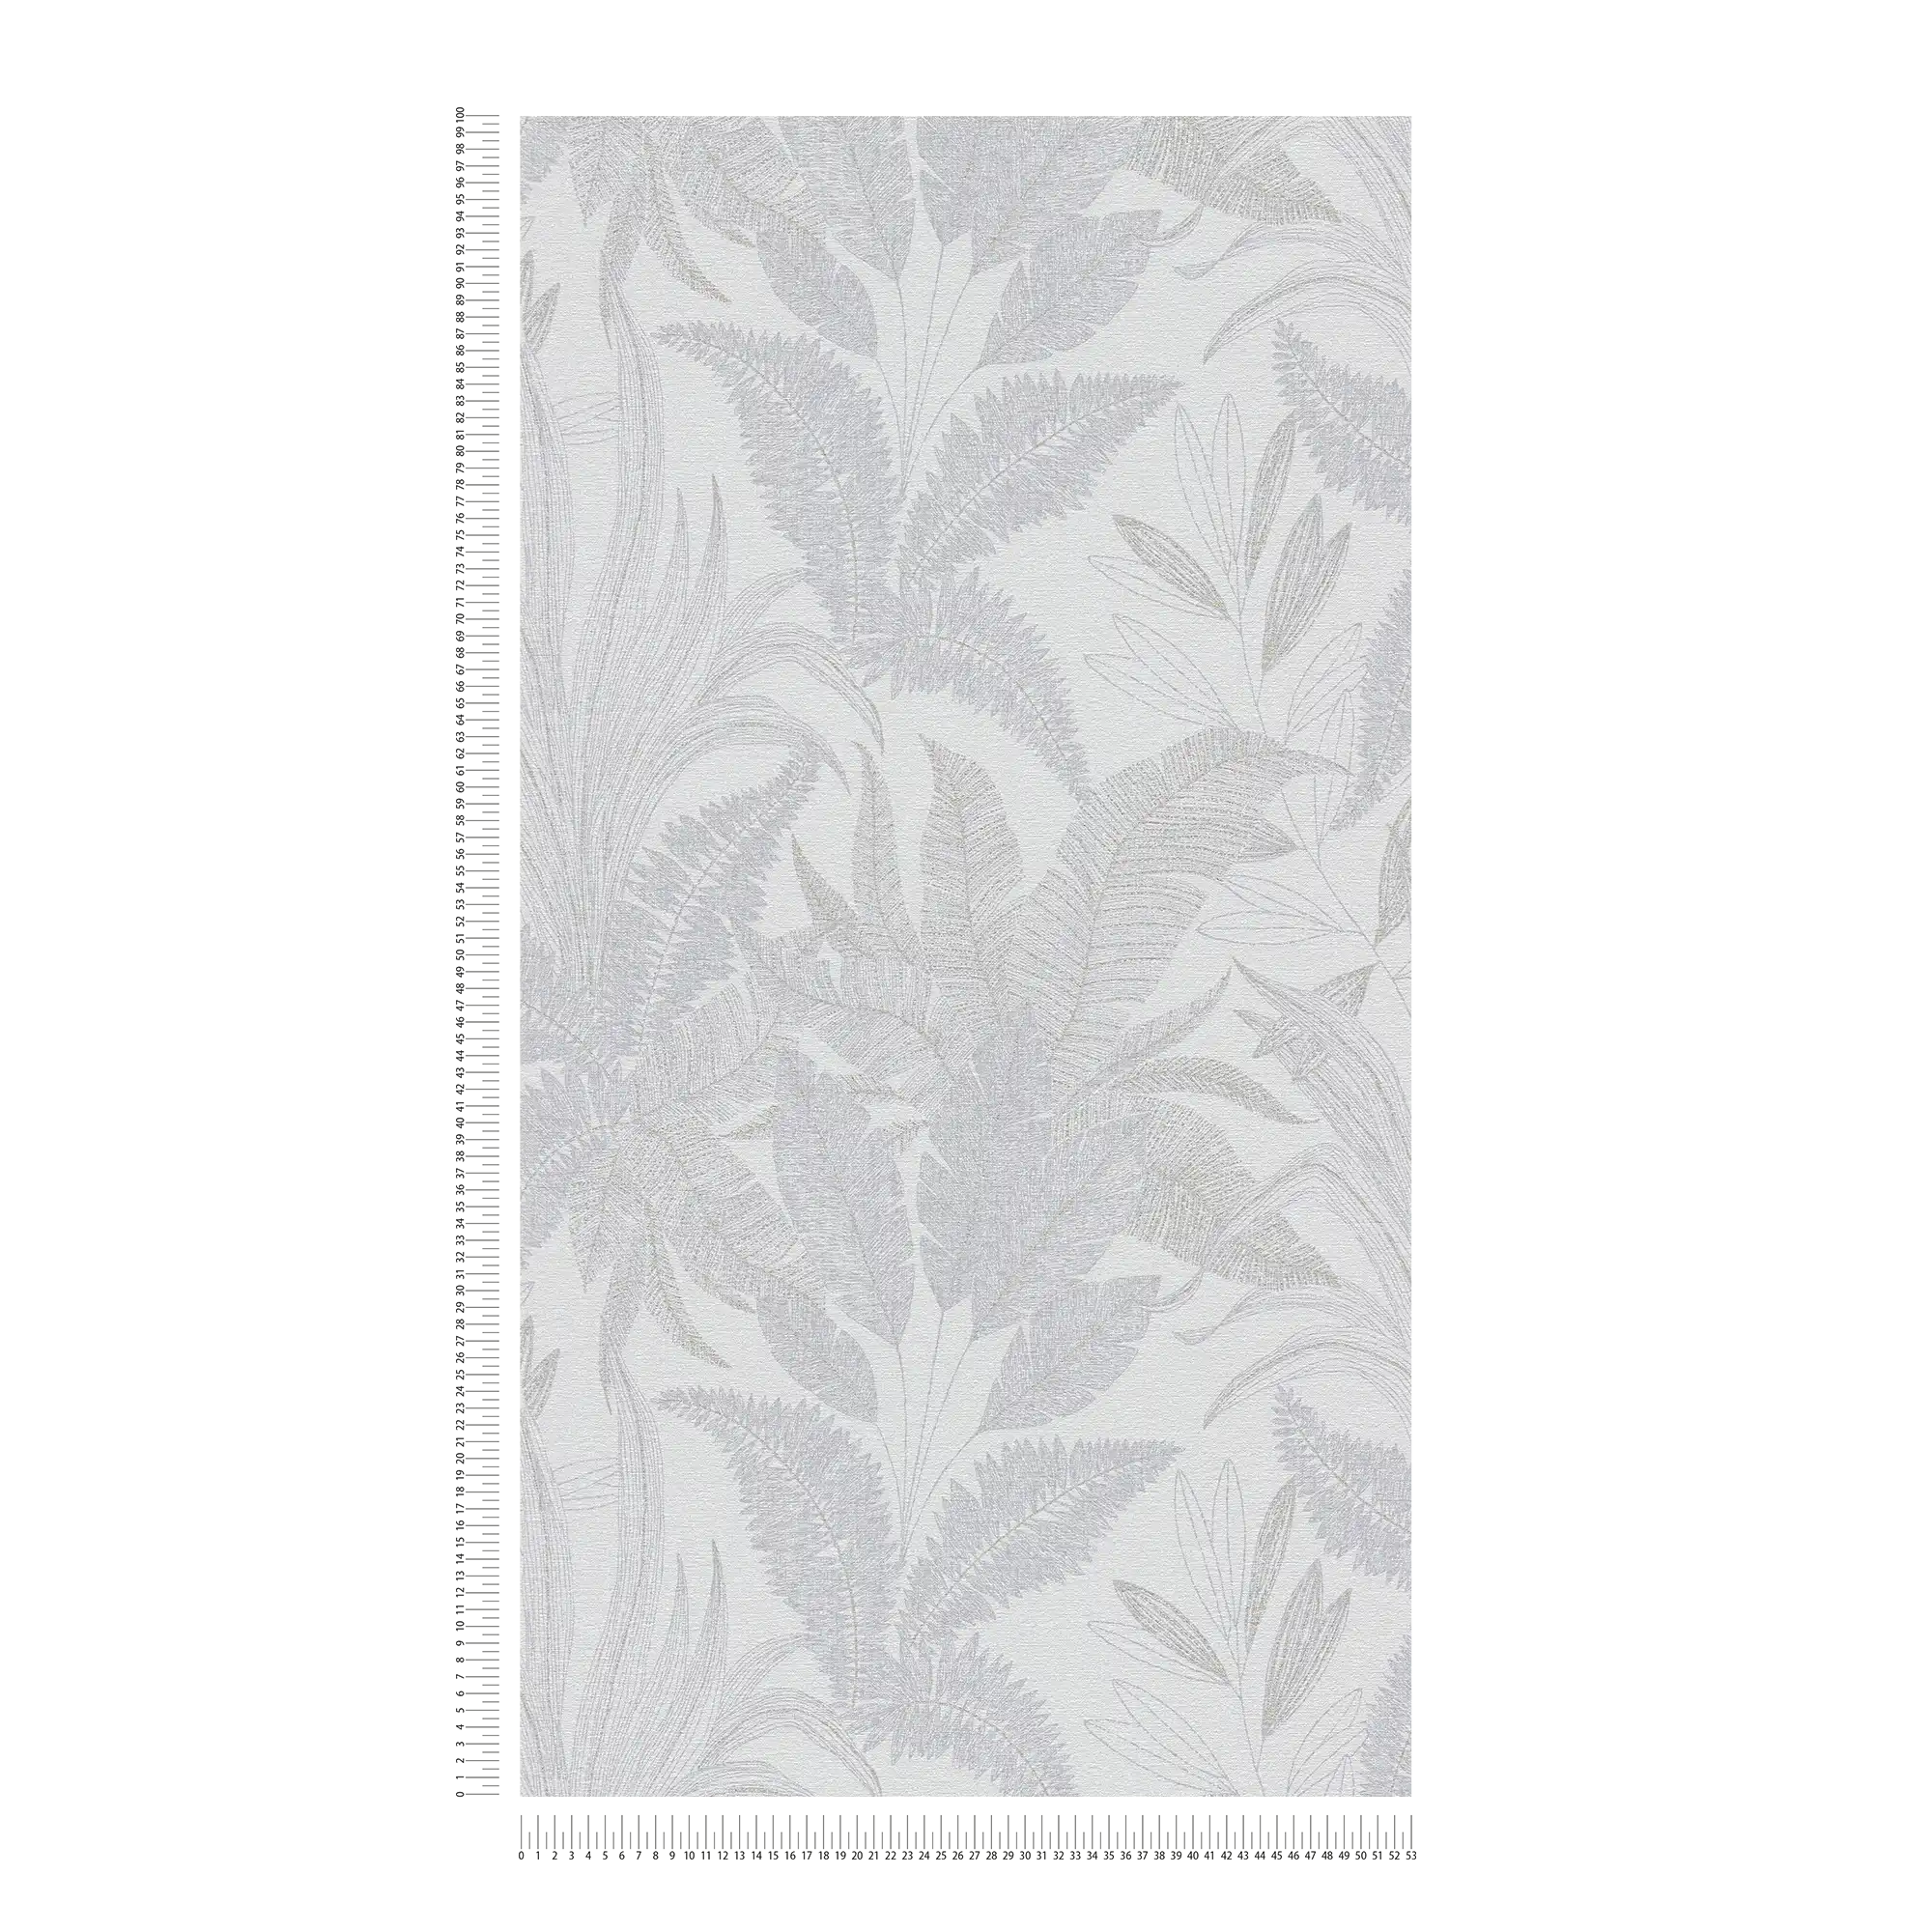             Non-woven wallpaper with jungle leaves - lightly textured pattern - grey, cream, gold
        